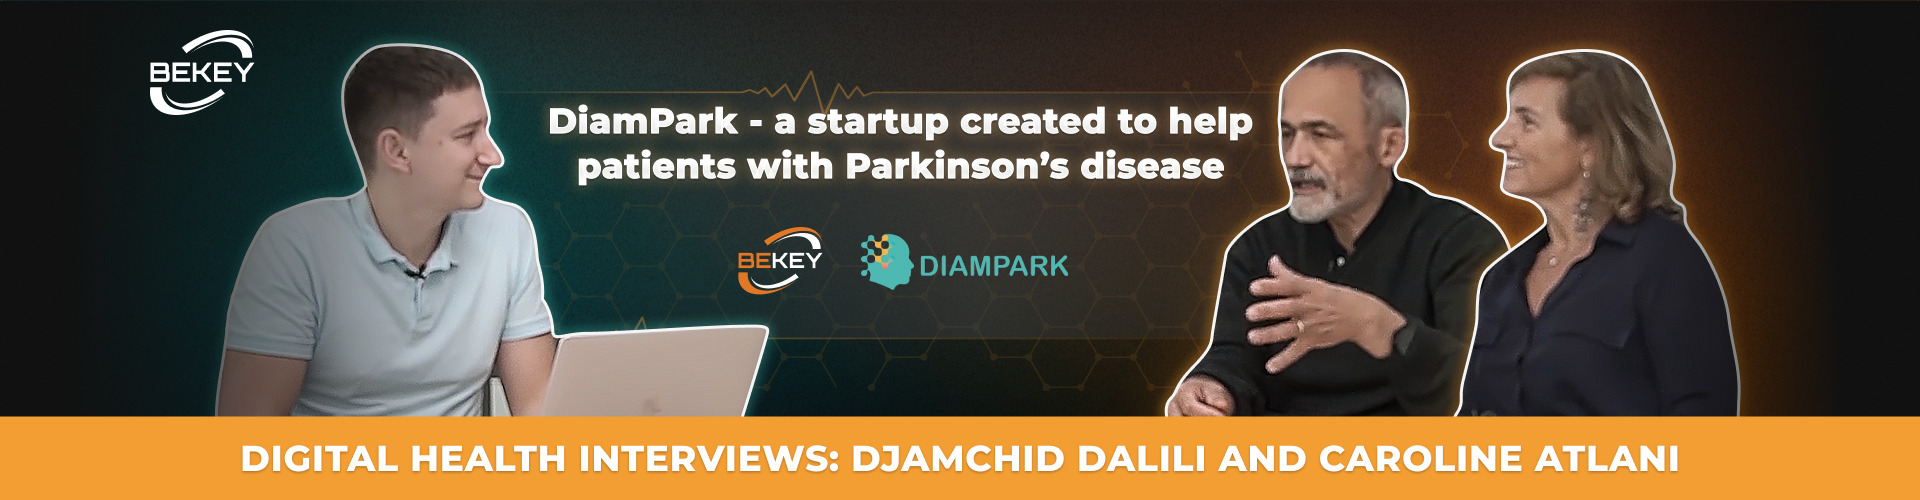 DiamPark — a Startup with a Meaning, Created to Help Patients with Parkinson’s Disease. Digital Health Interviews: Djamchid Dalili & Caroline Atlani - image